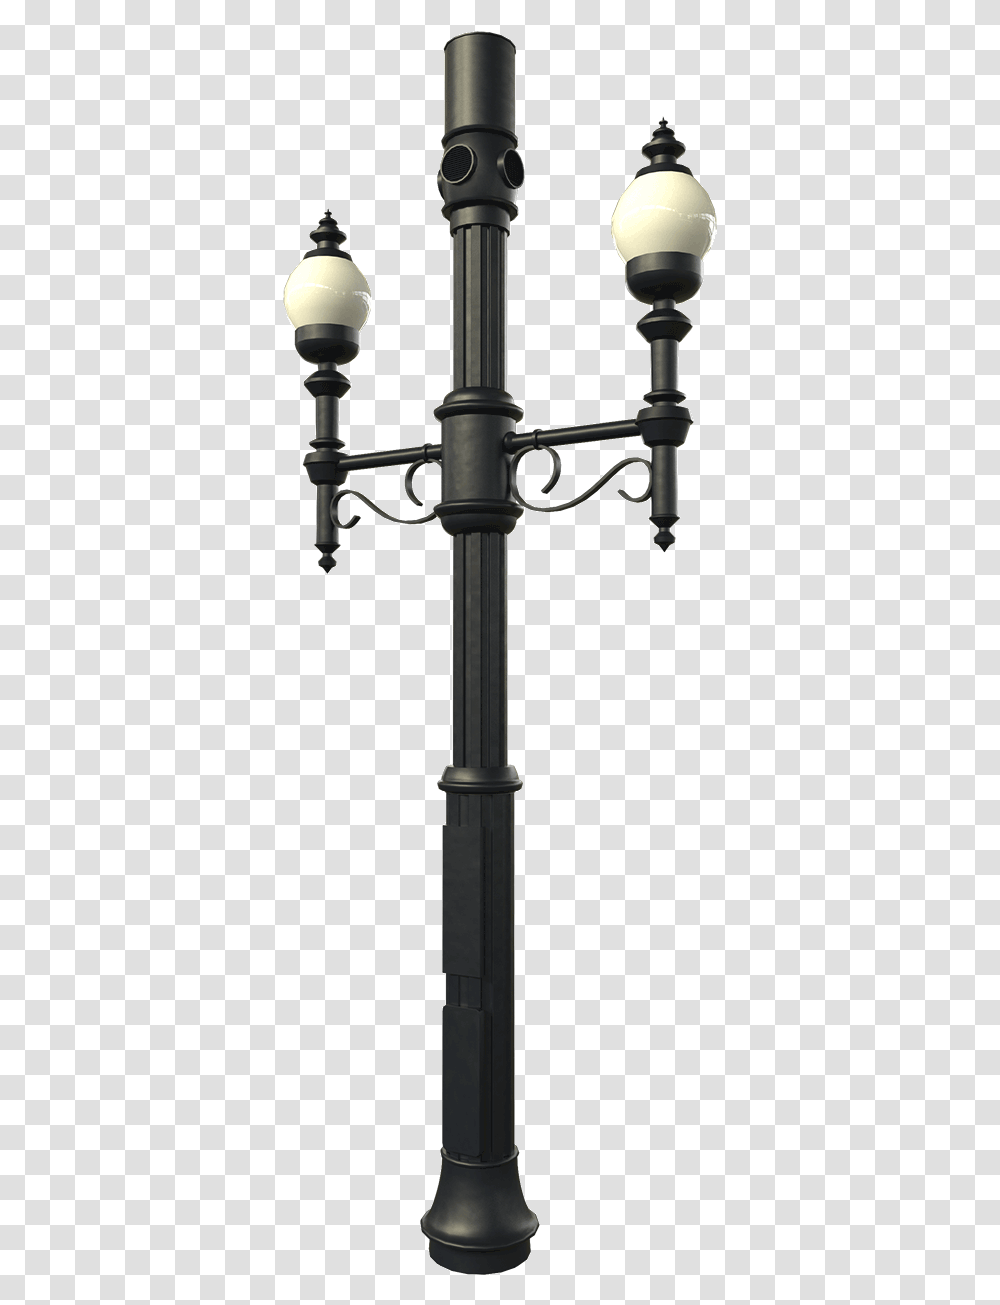 Nepsa Solutions By Proving 3d Renders Of Their Product Column, Lamp Post, Sink Faucet, Lighting Transparent Png